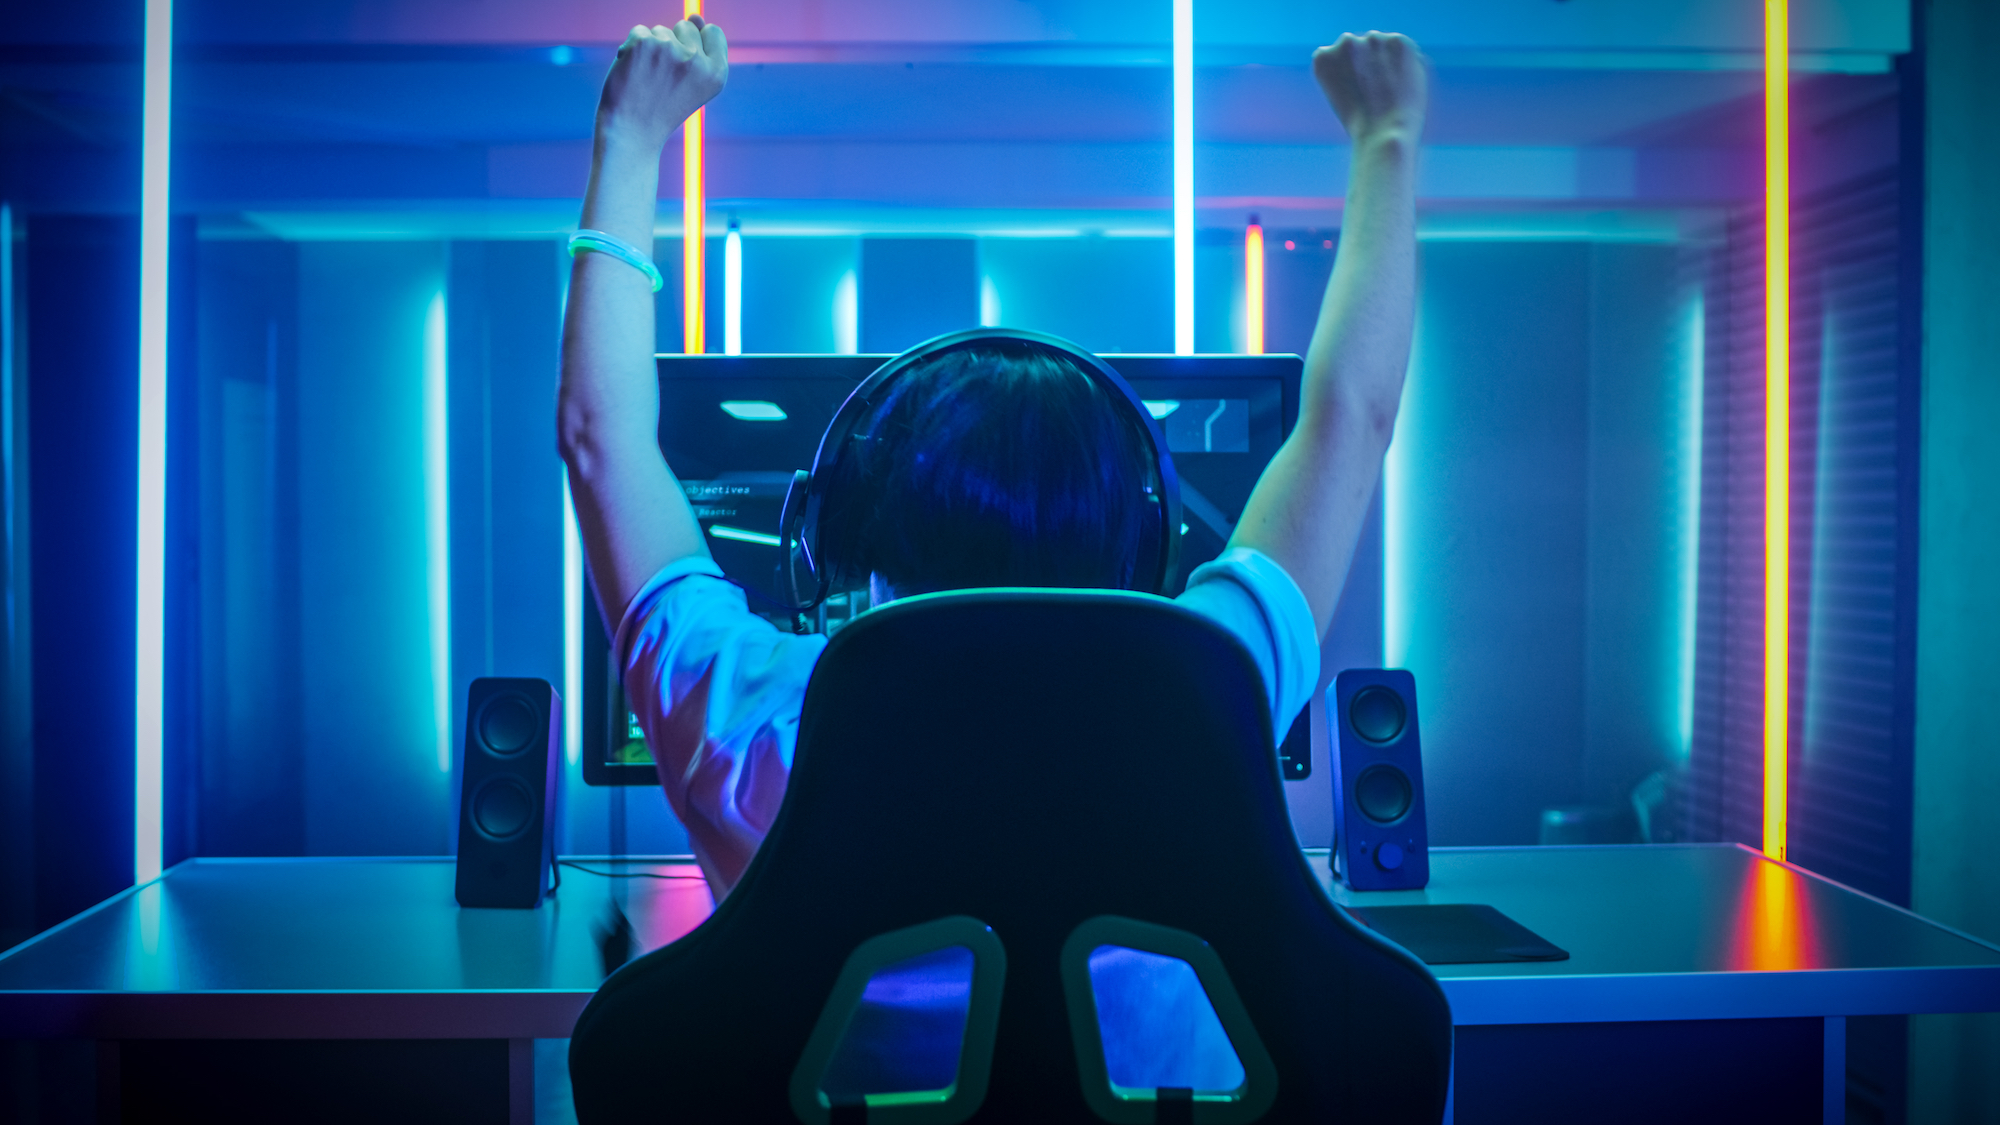 A person is shown celebrating a win while playing a video game.